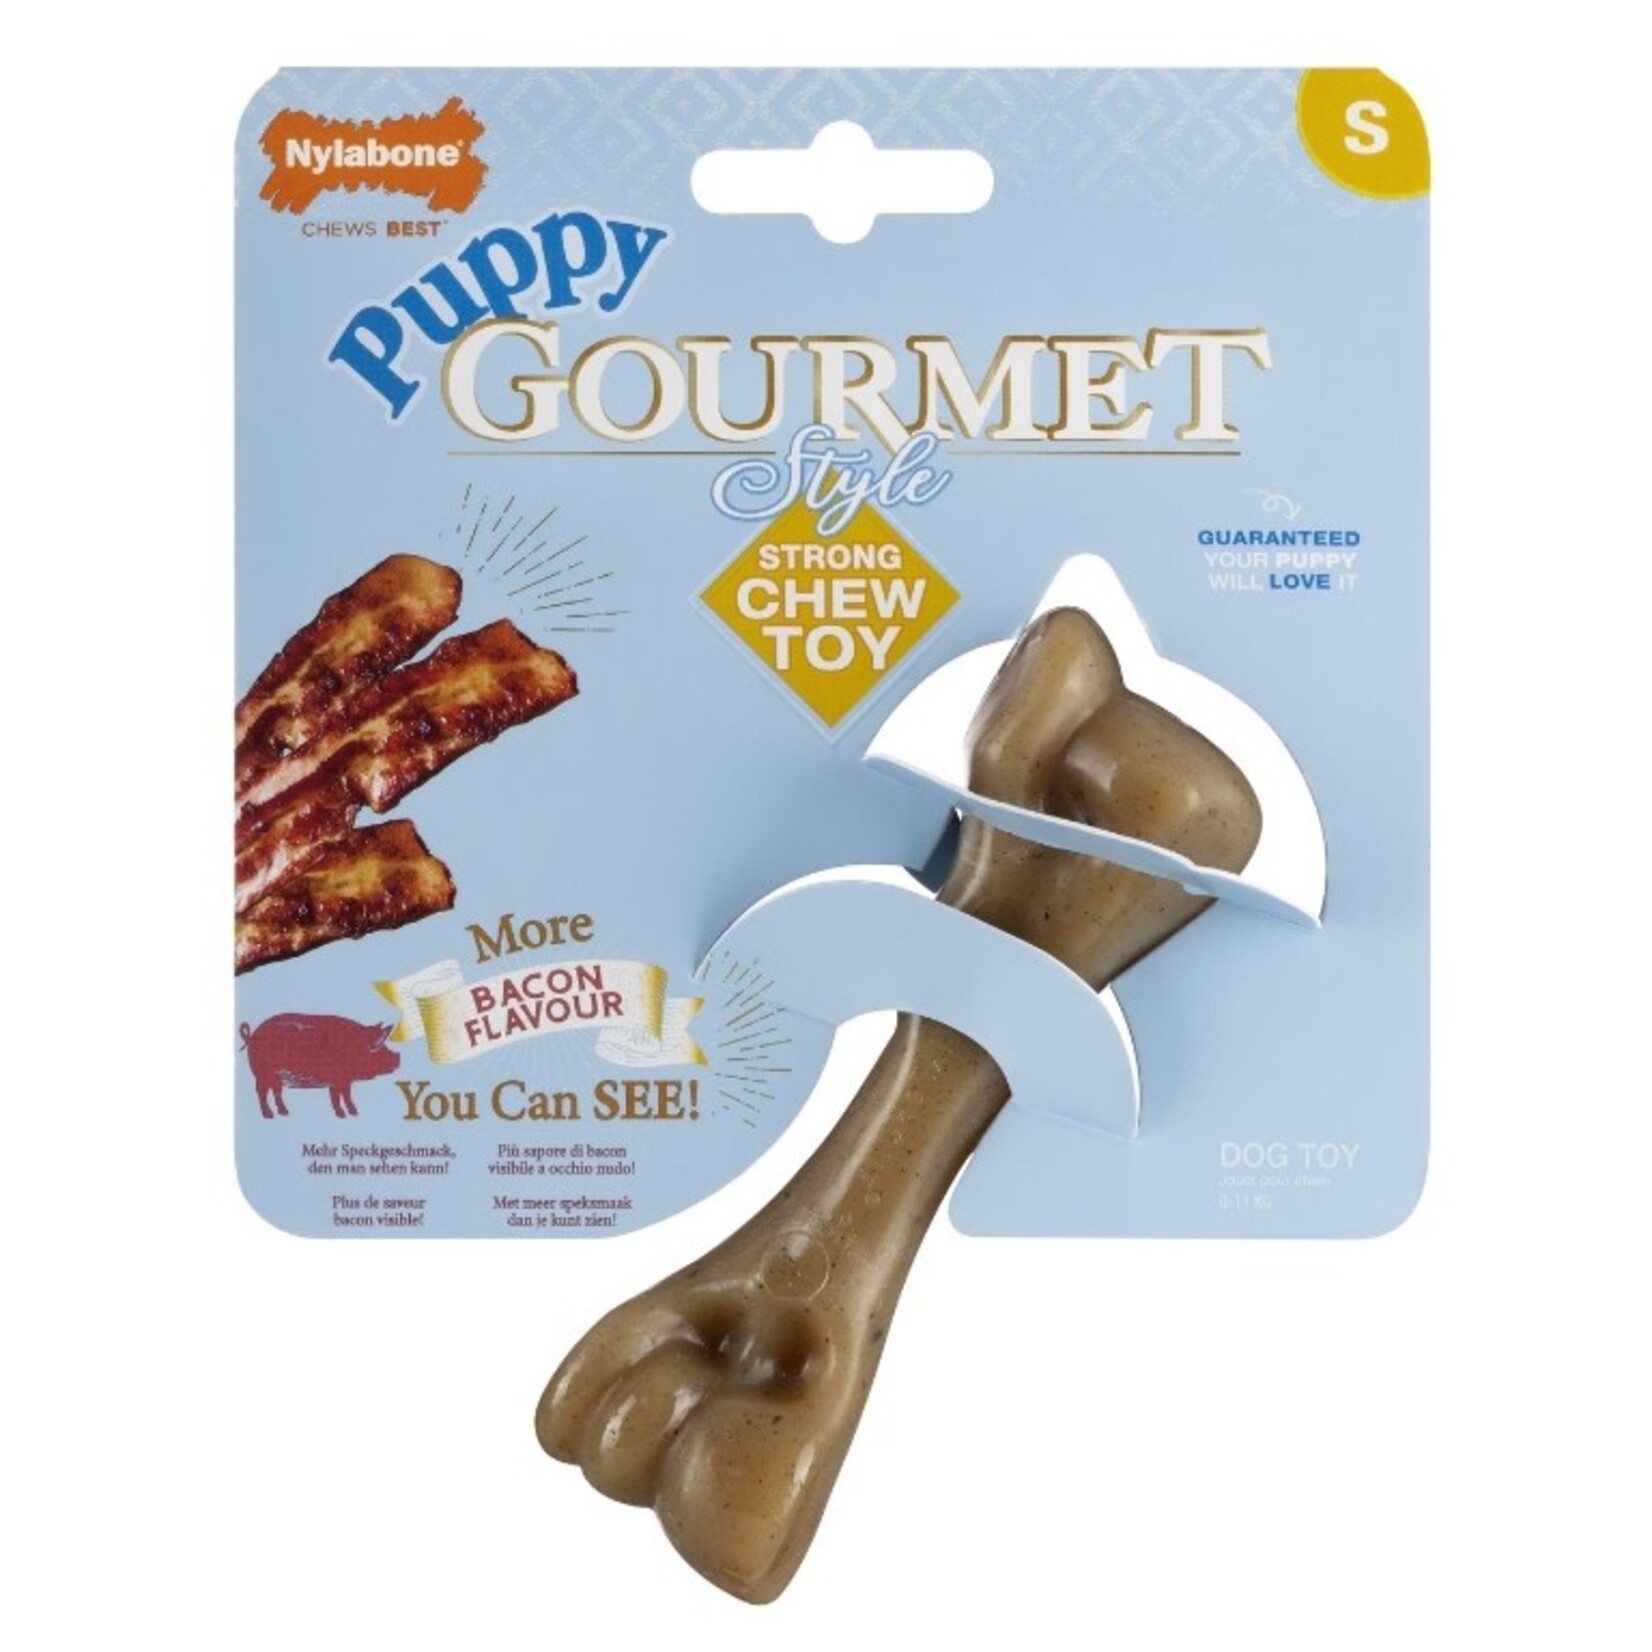 Nylabone Puppy Gourmet Femur Strong Chew Toy, Bacon, Small